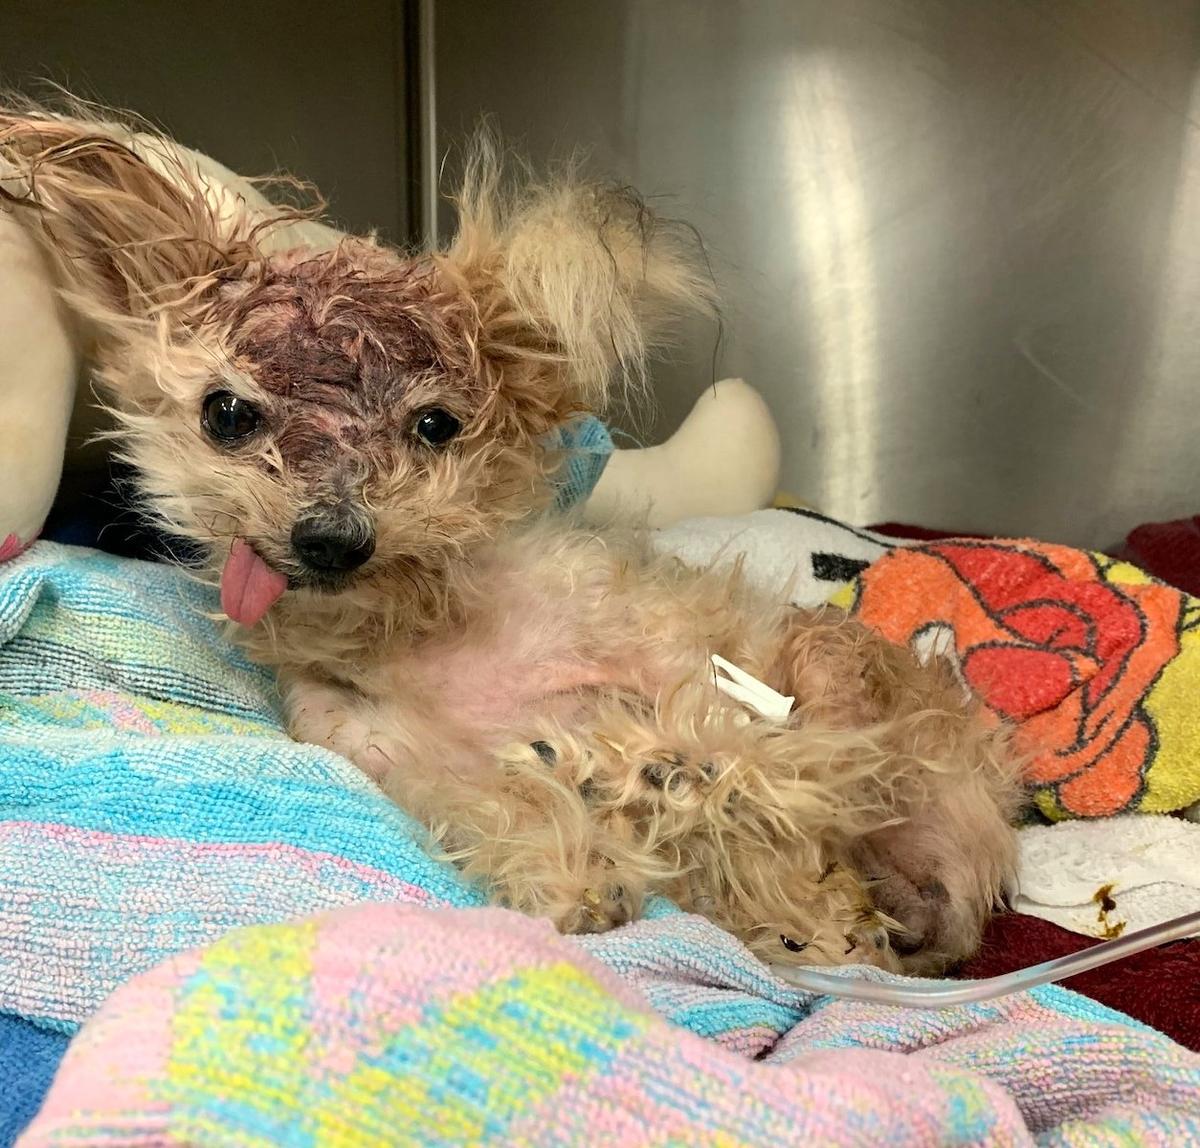 A small Yorkshire Terrier with a traumatic head injury has died after she was found in a North Philadelphia trash can on Oct. 3, 2019. (Philadelphia SPCA)